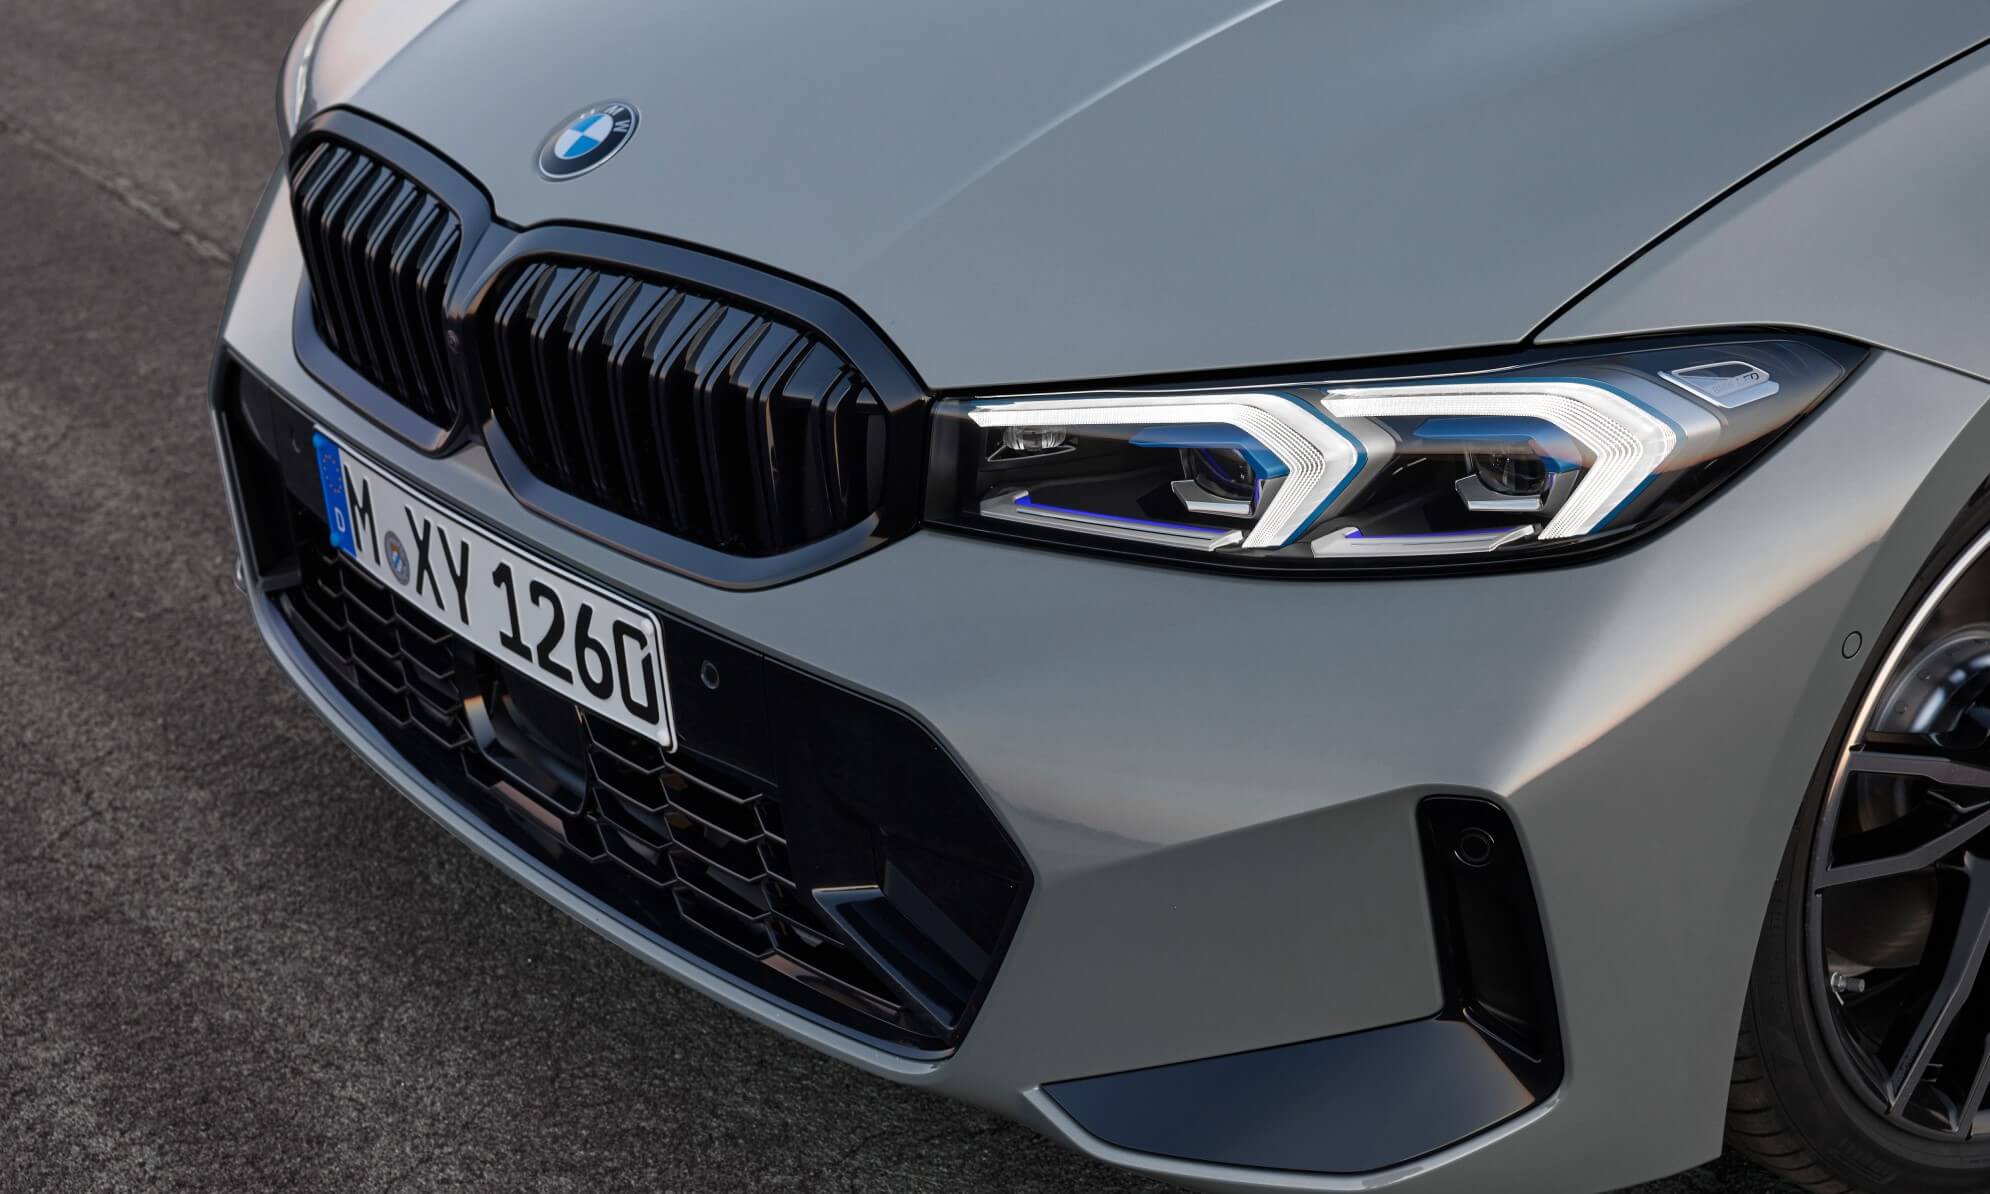 Facelifted 3 Series BMW headlights